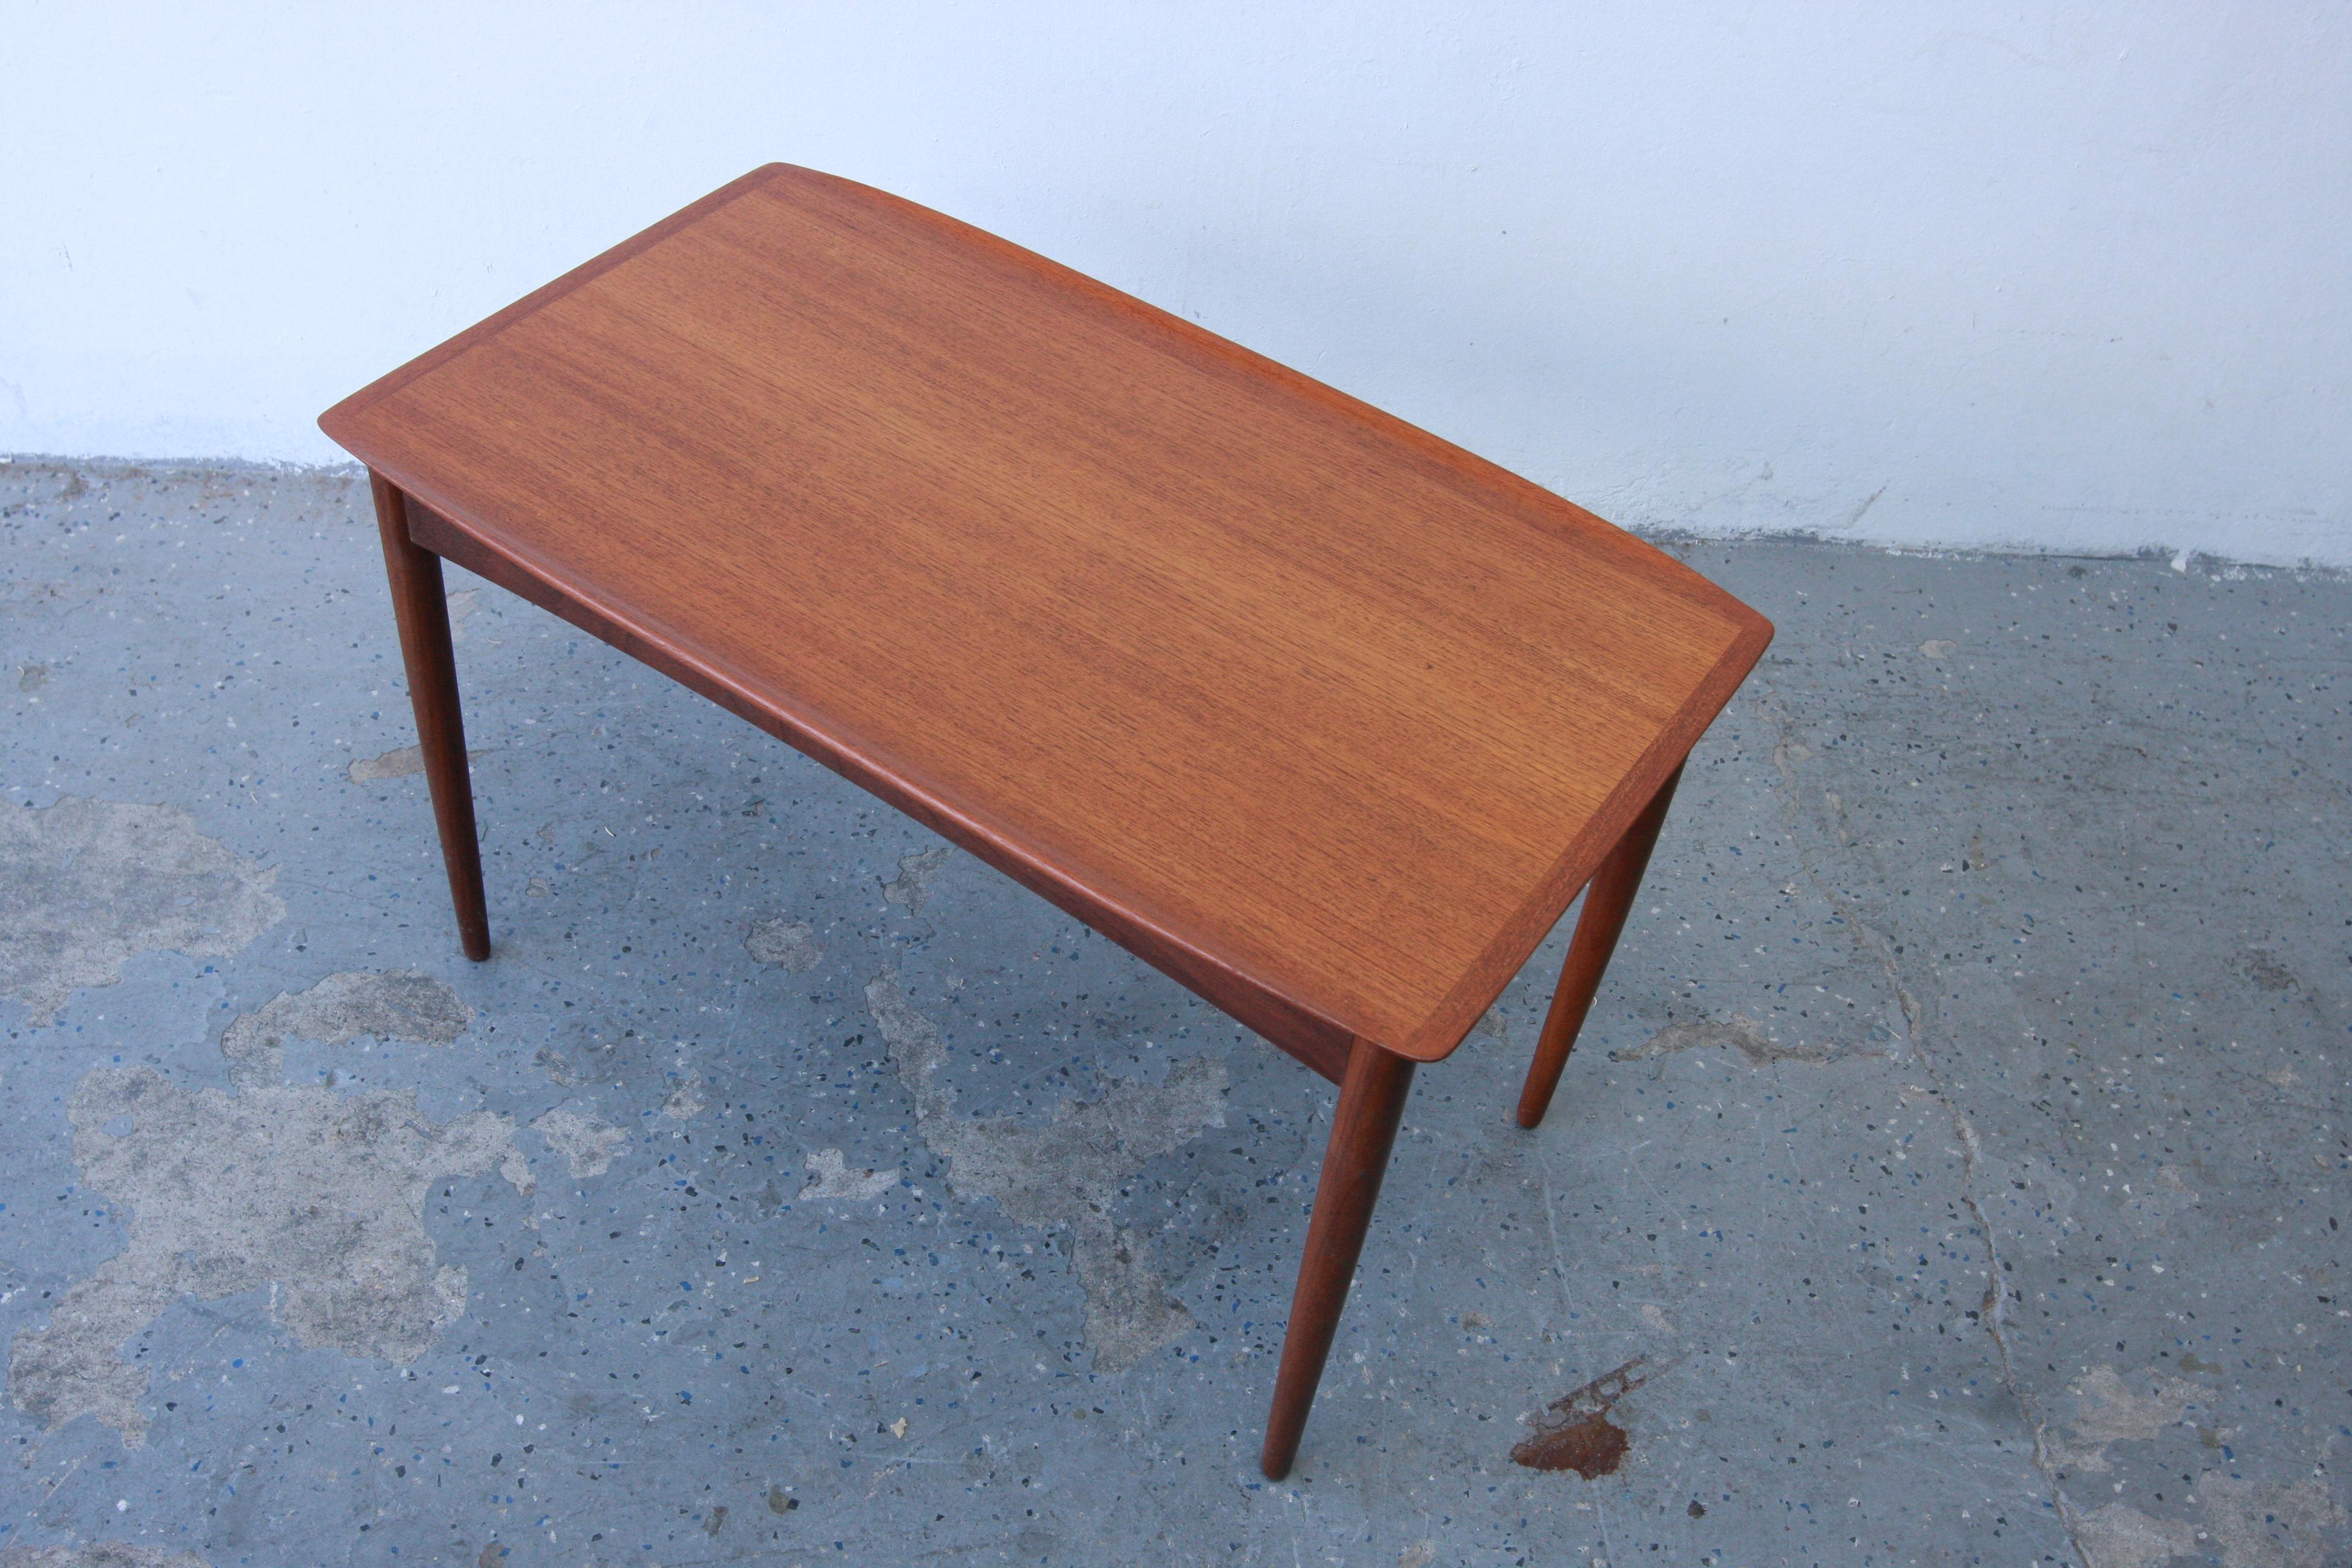 Spectacular 1960s Danish Modern teak side table by Mobelintarsia from Denmark. Features a rectangle shaped top in beautifully grained teak with carved lip edges and the sculpted edges are open at the corners. The table stands on four round tapered